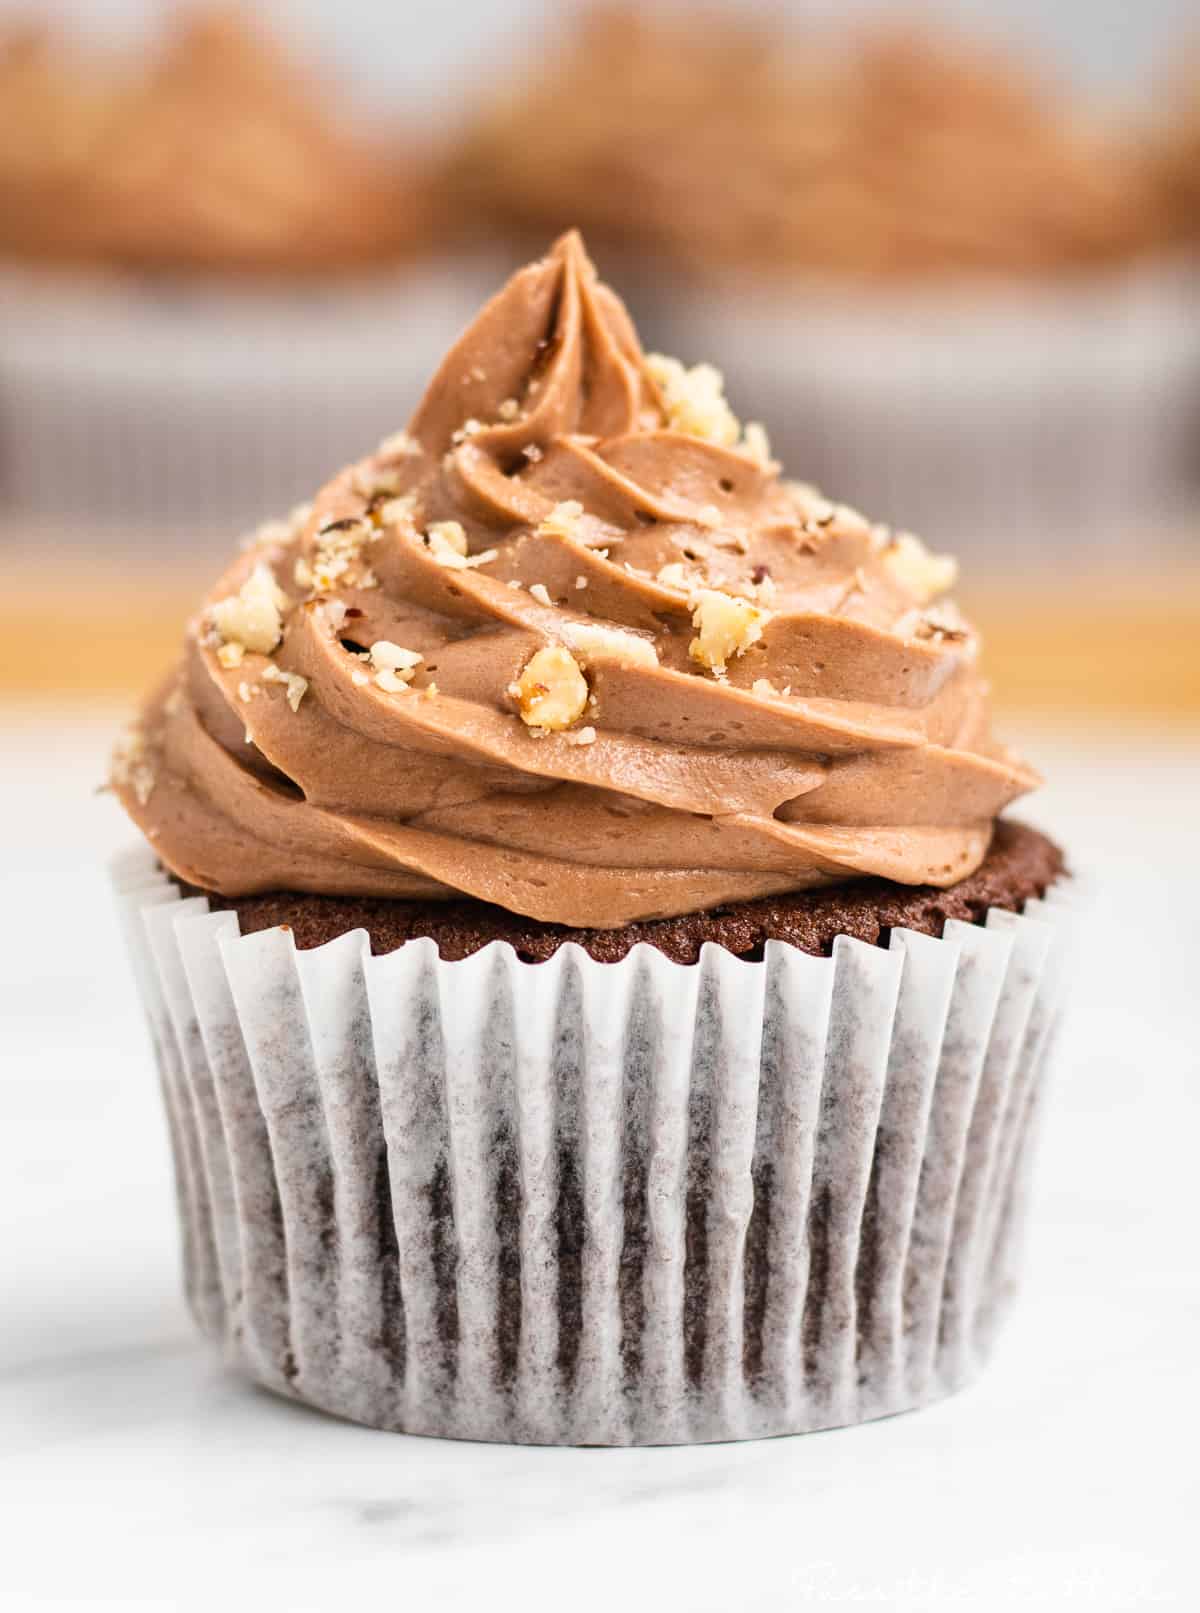 chocolate nutella cupcaked with nutella buttercream swirled on top and topped with hazelnuts